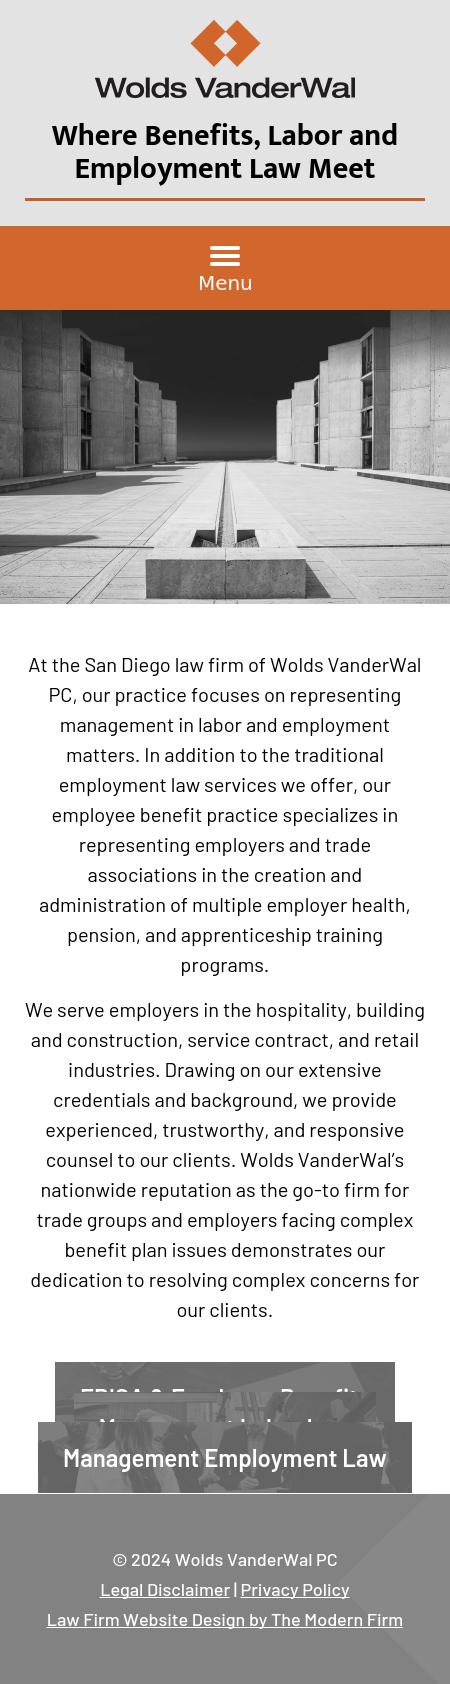 Wolds Law Group PC - San Diego CA Lawyers